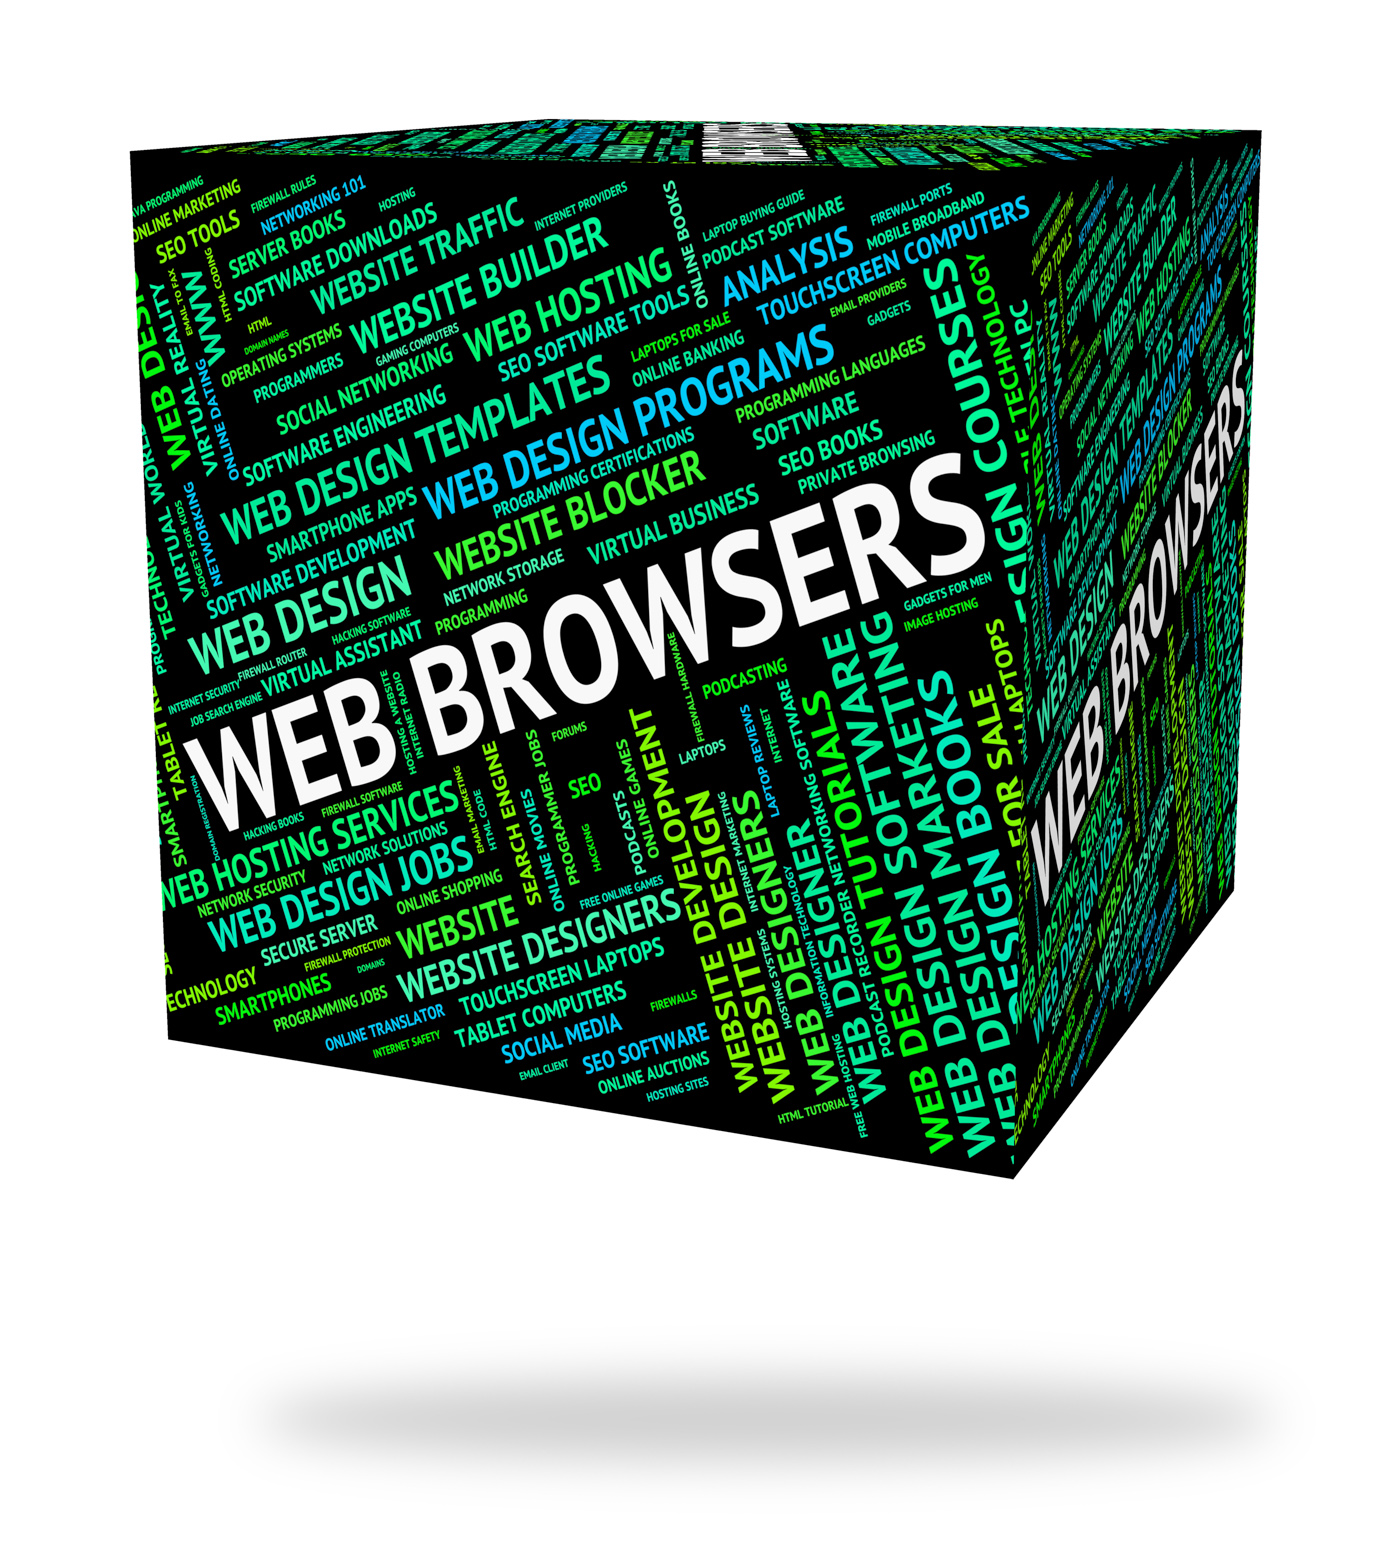 Web browsers indicates browsing text and website photo